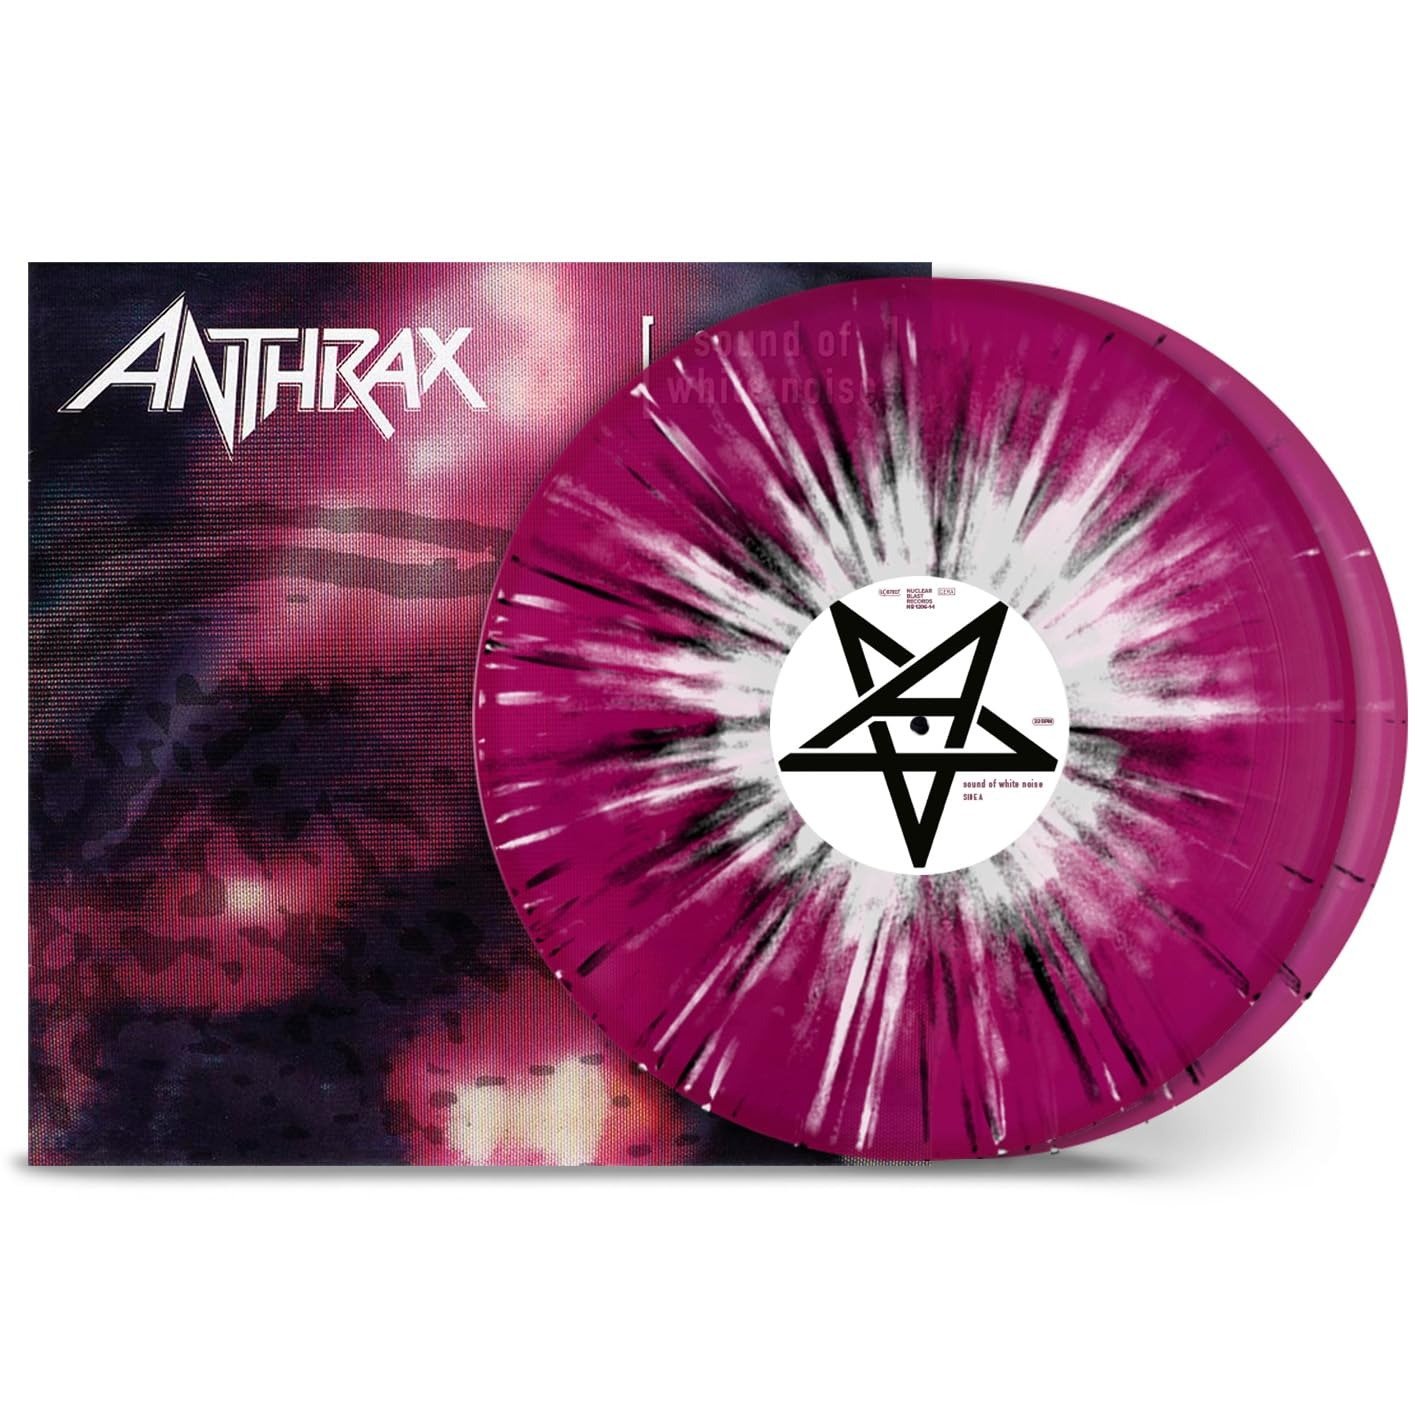 CD Shop - ANTHRAX SOUND OF WHITE NOISE COLORED LTD.